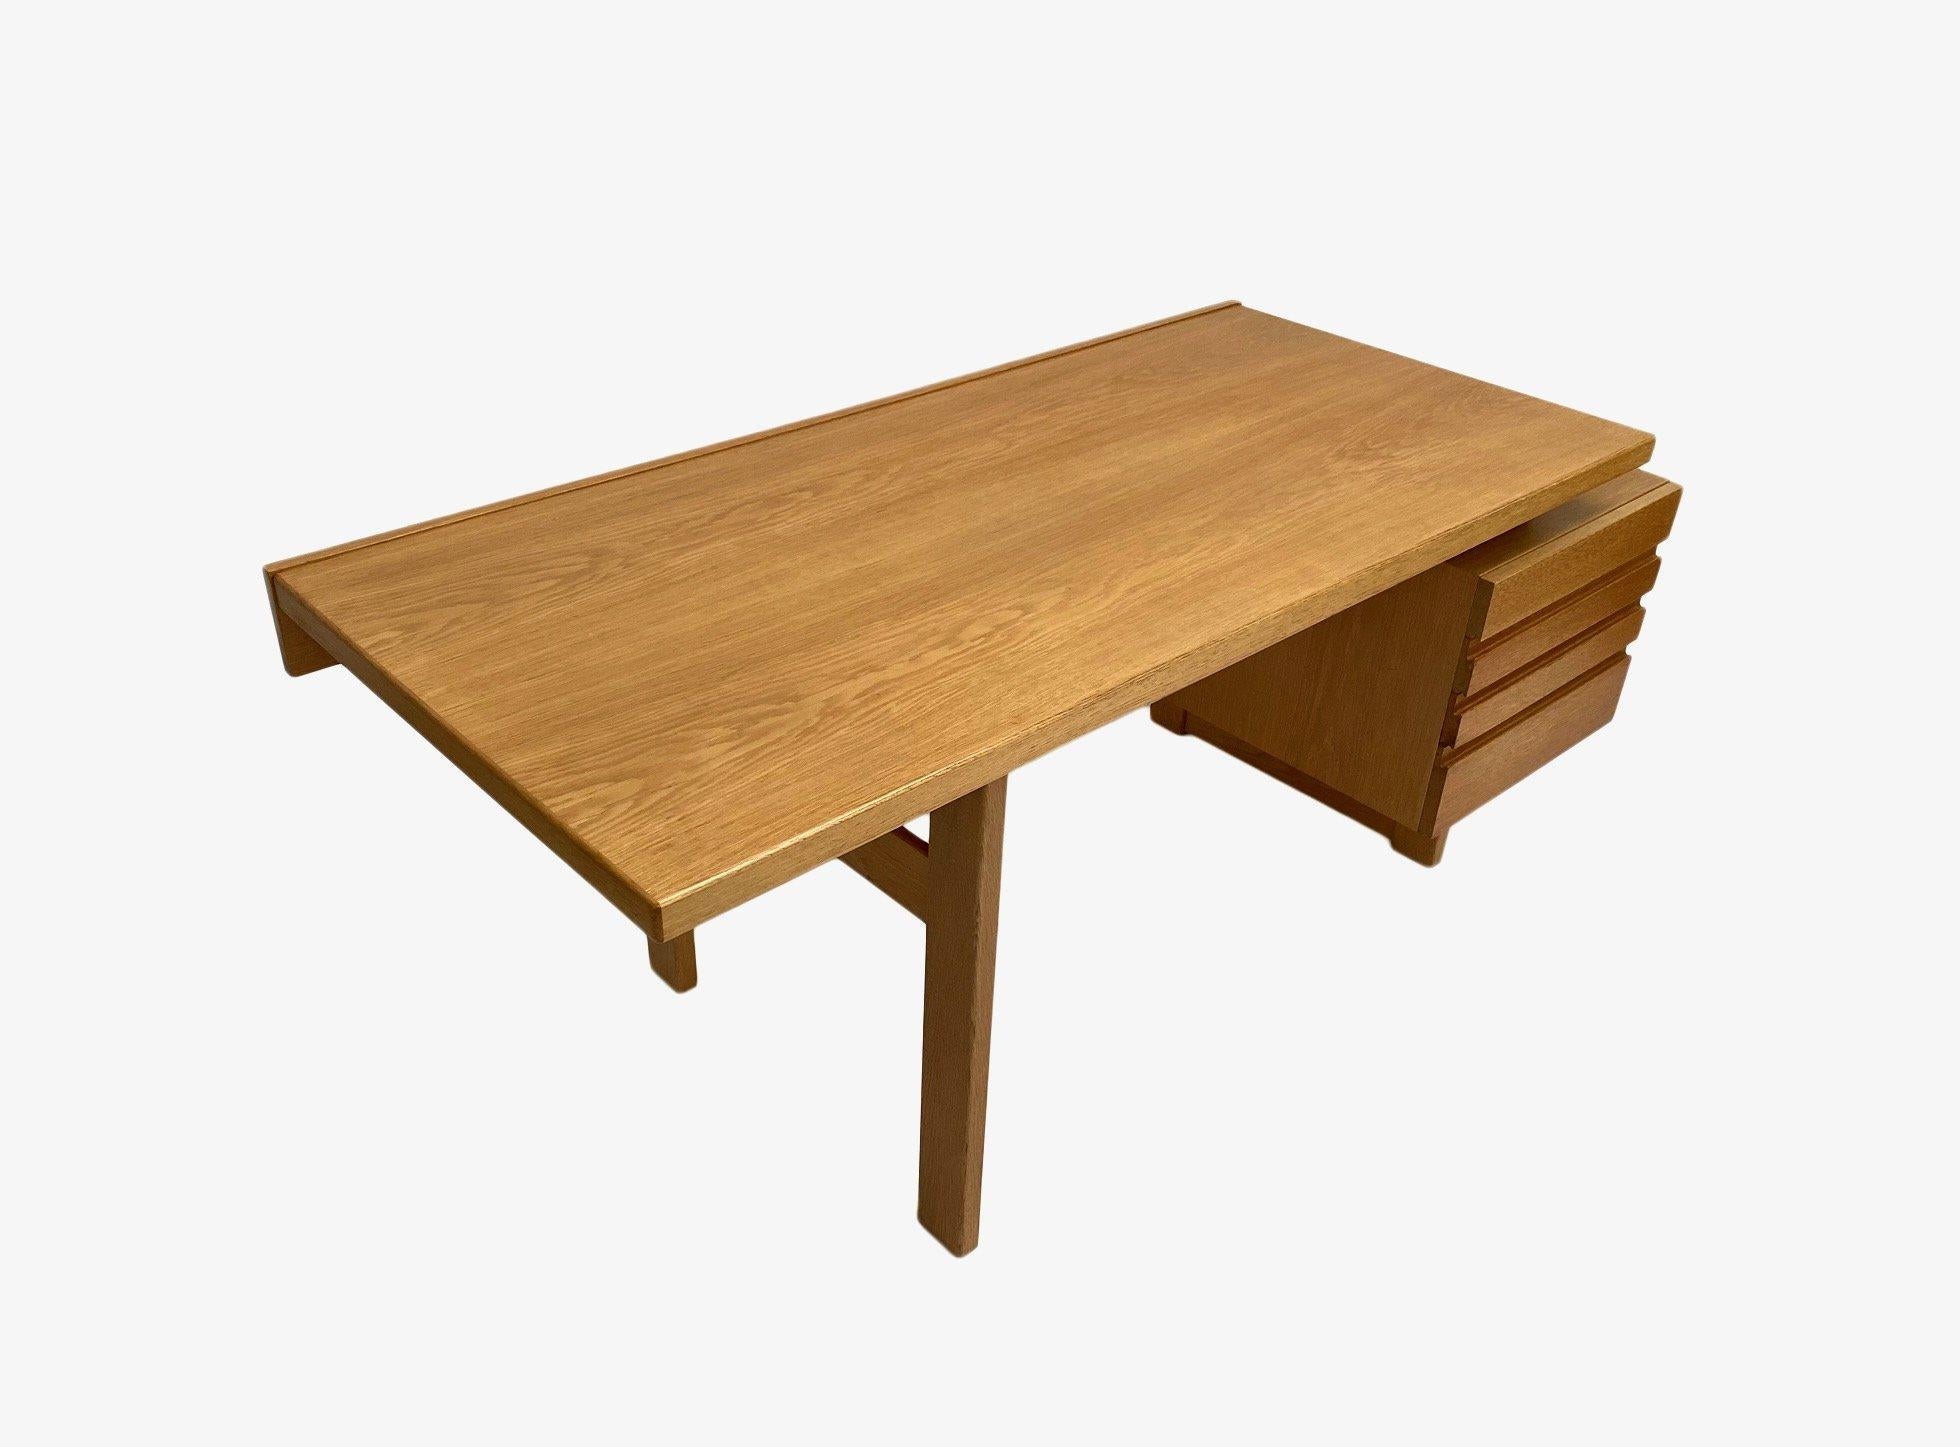 A beautiful Finnish ‘Voula’ oak writing desk designed by Olavi Hänninen for Nupponen in the 1950s, this would make a stylish addition to any work area. A striking piece of classically designed Scandinavian furniture.

The desk has a bank of four